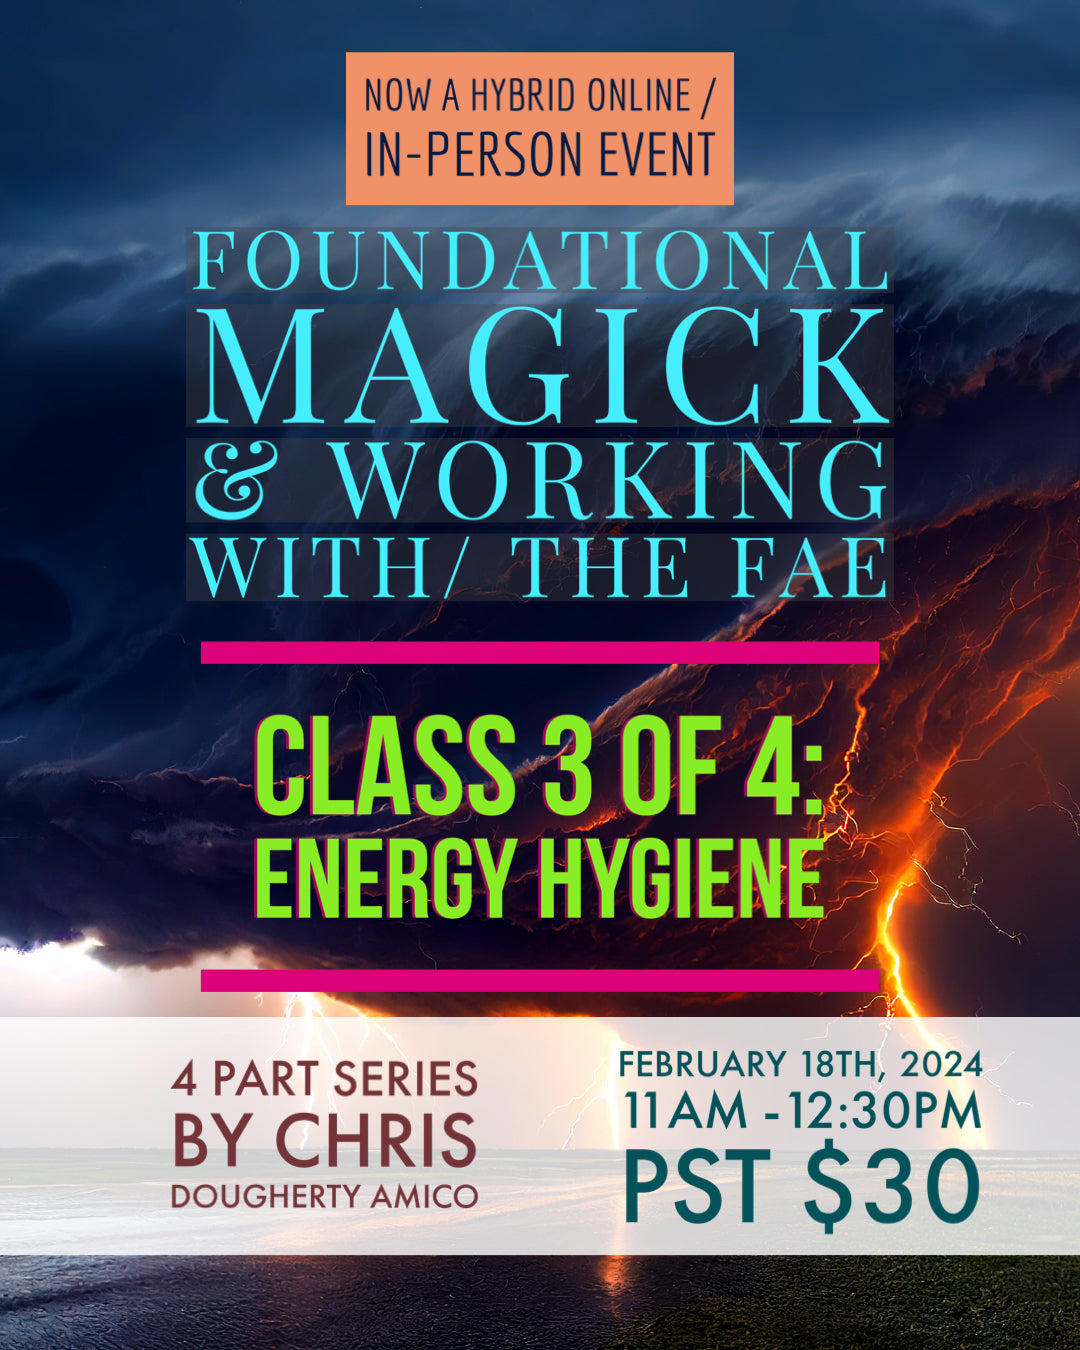 (Hybrid Zoom/In-Person) Foundational Magick & Working with the Fae  - Energy Hygiene  - February 18th, 2024 11am -12:30pm